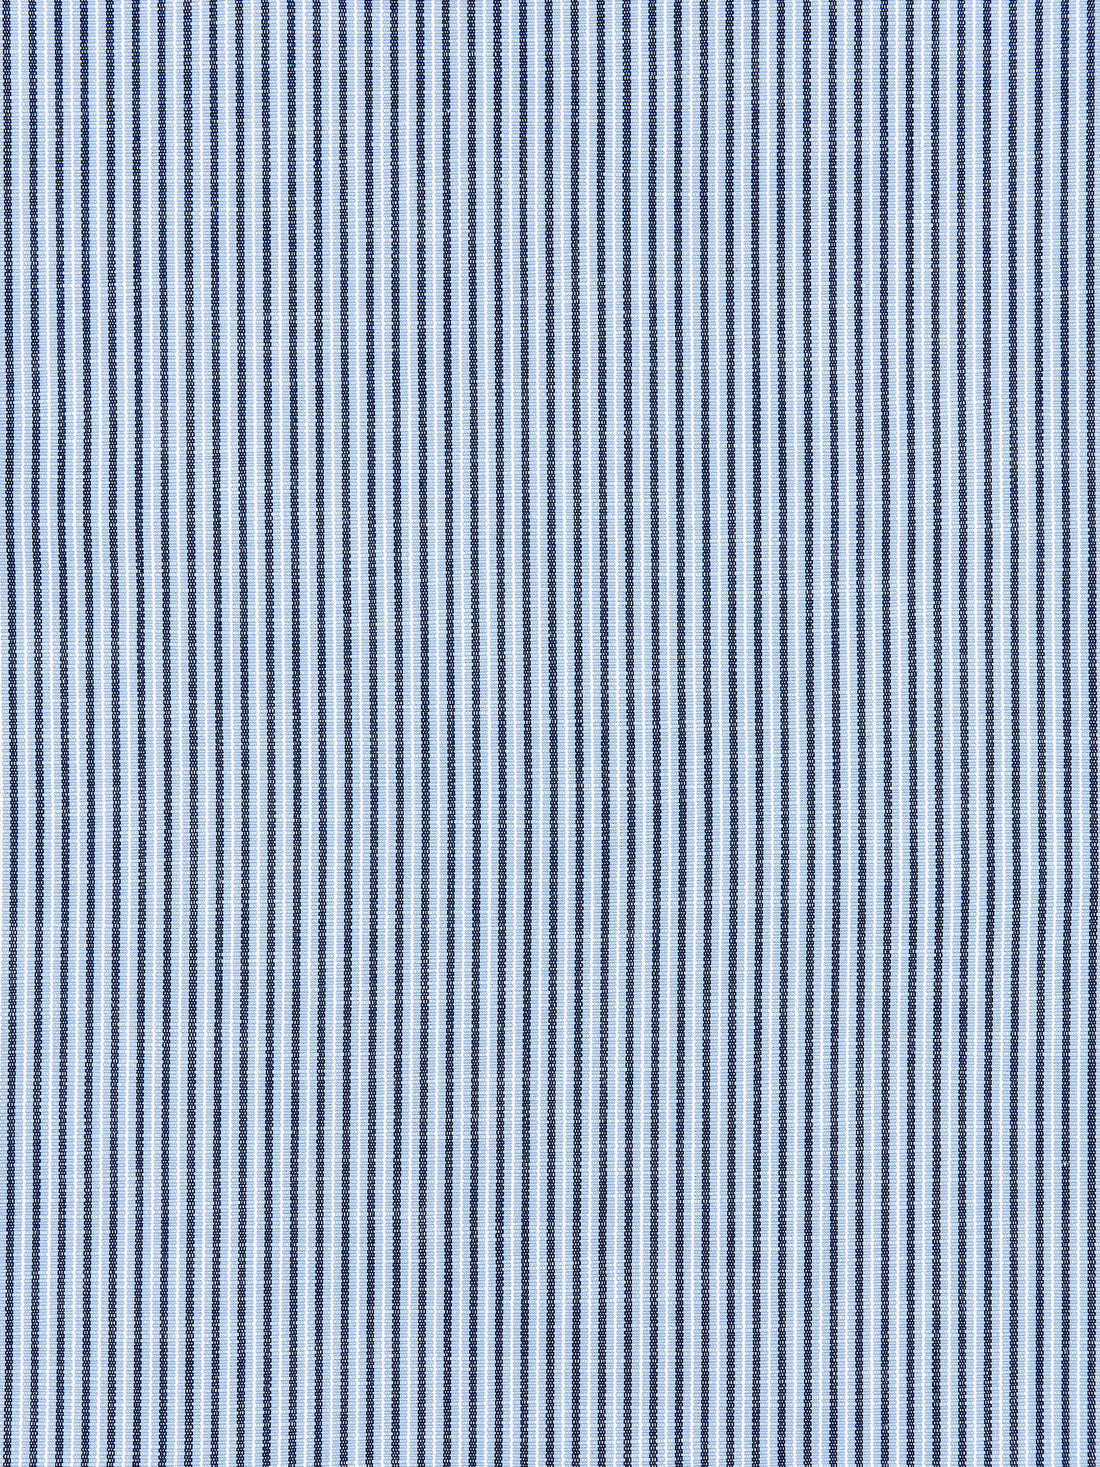 Tisbury Stripe fabric in cornflower color - pattern number SC 000327109 - by Scalamandre in the Scalamandre Fabrics Book 1 collection